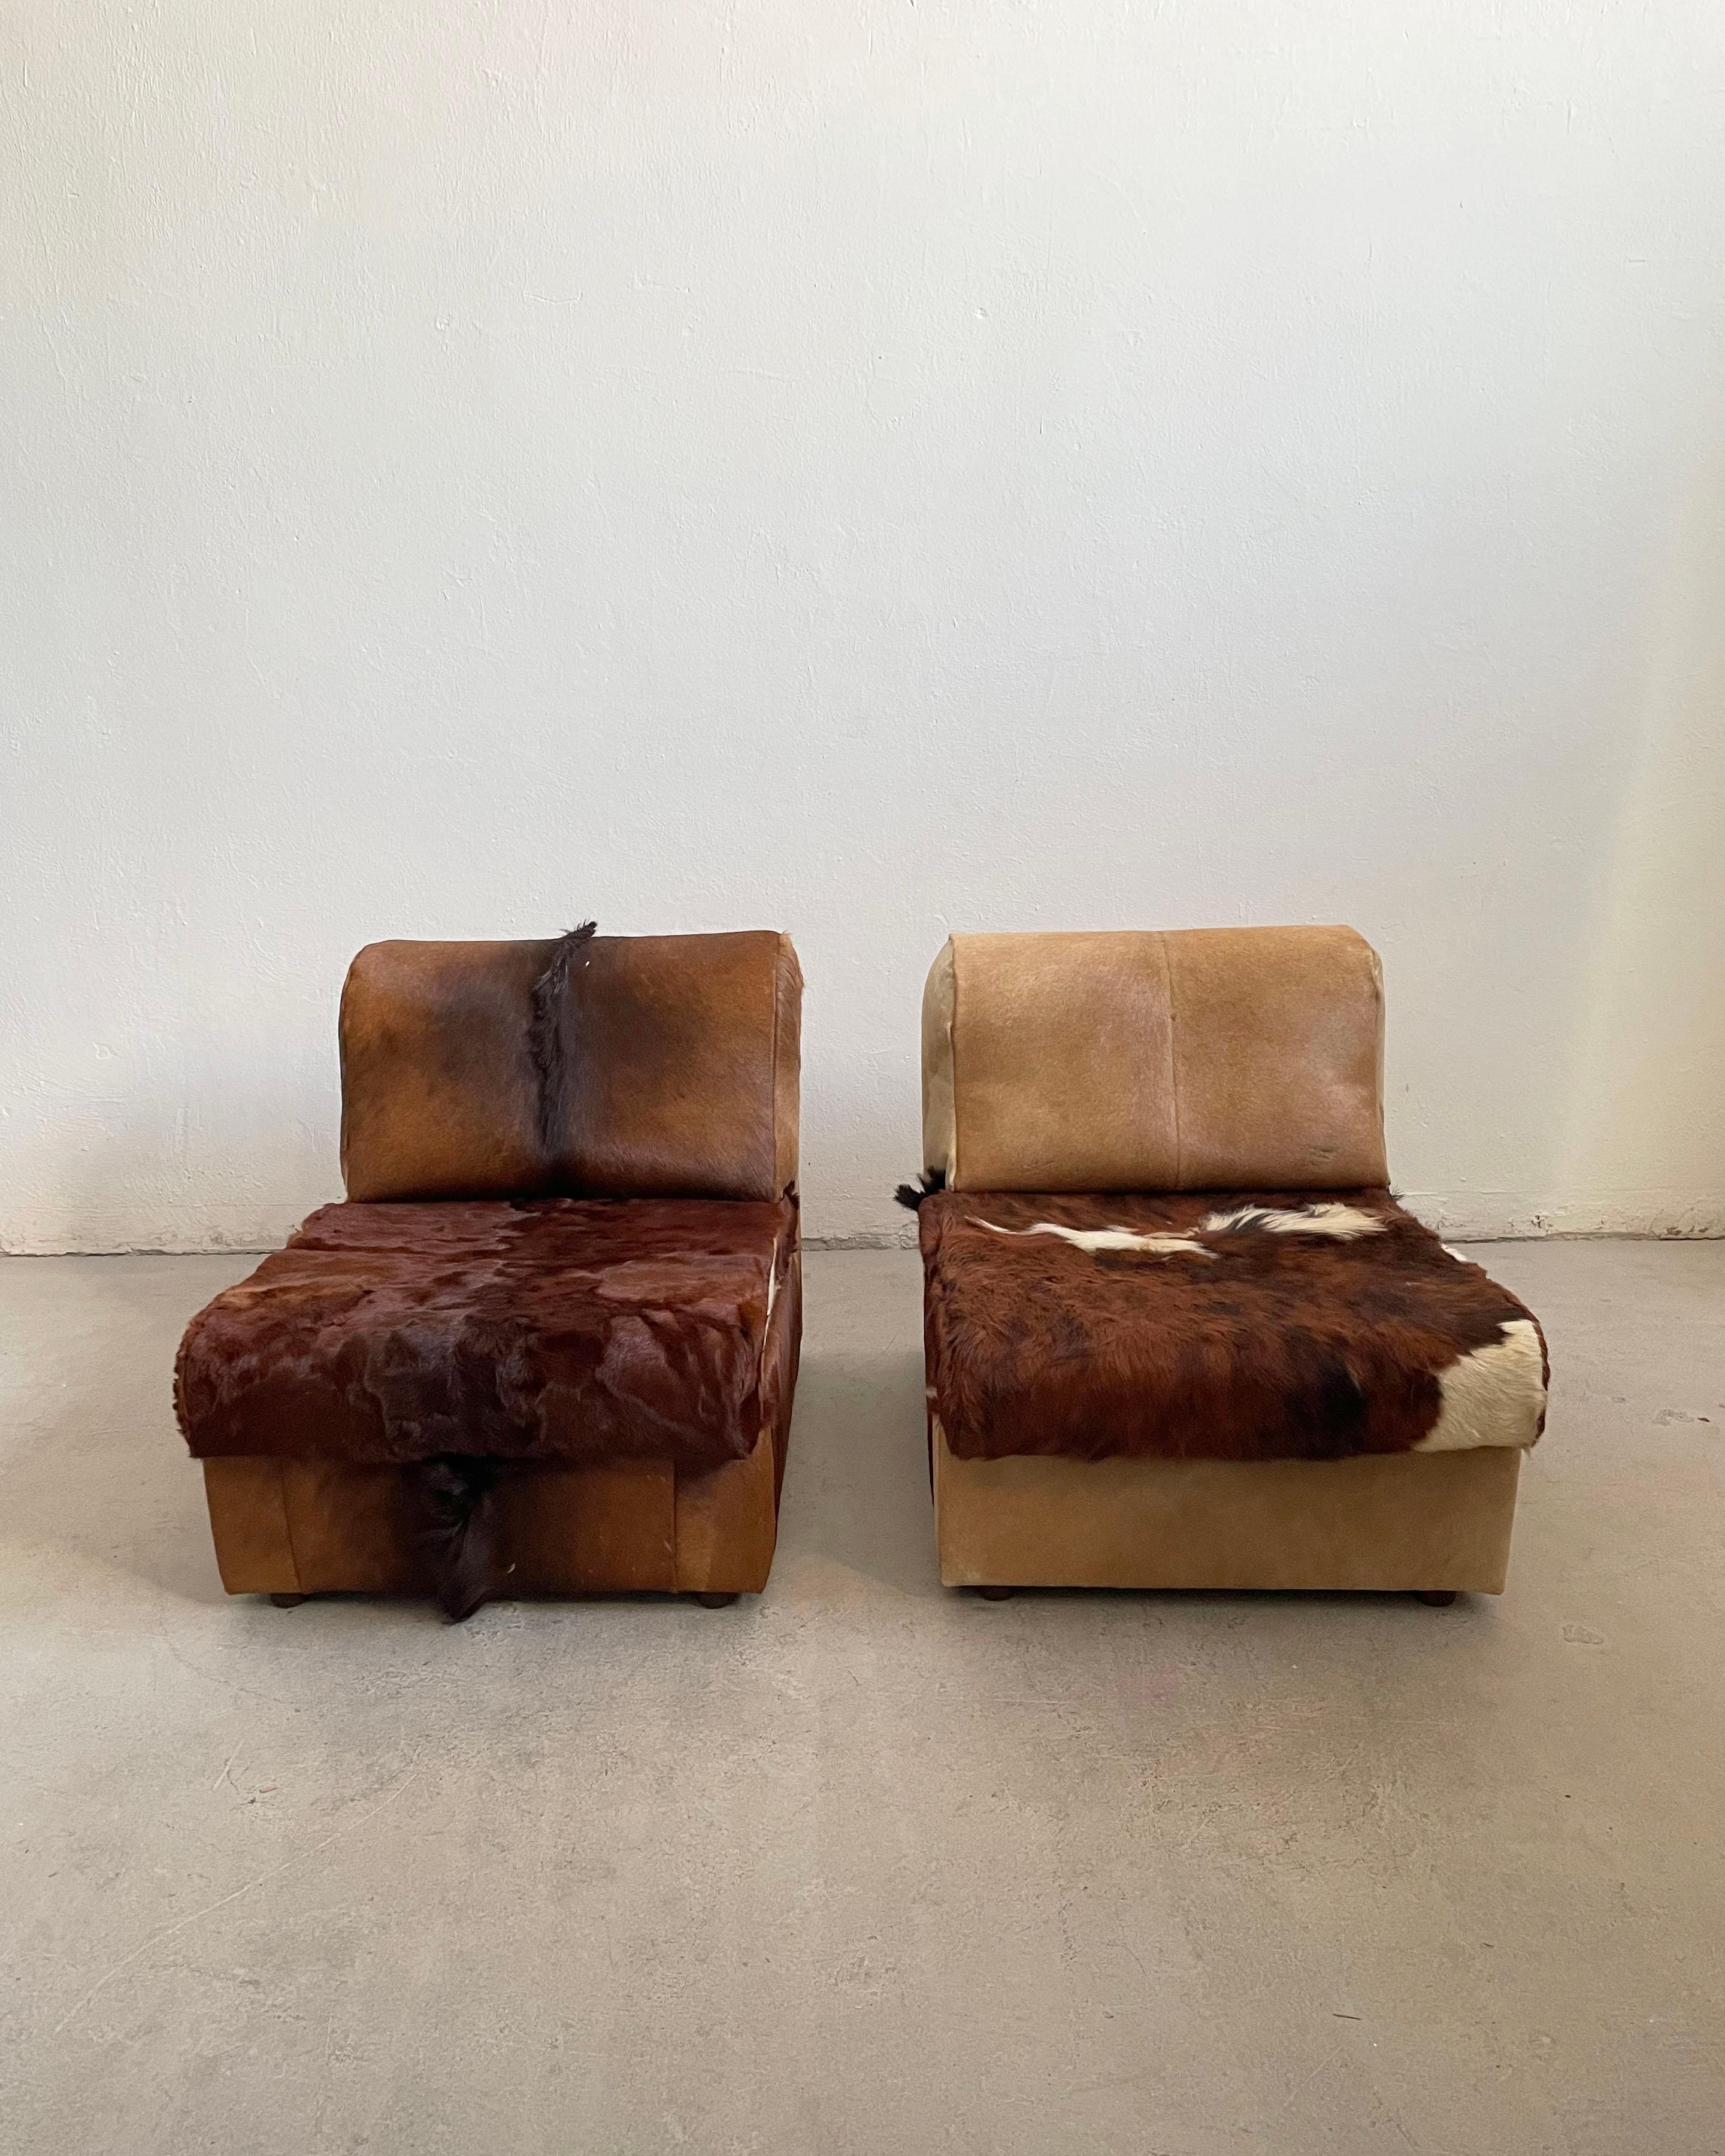 Lounge Seating Set, Sofa + Chairs in Cow Hide, Cow Fur, 1970's For Sale 1